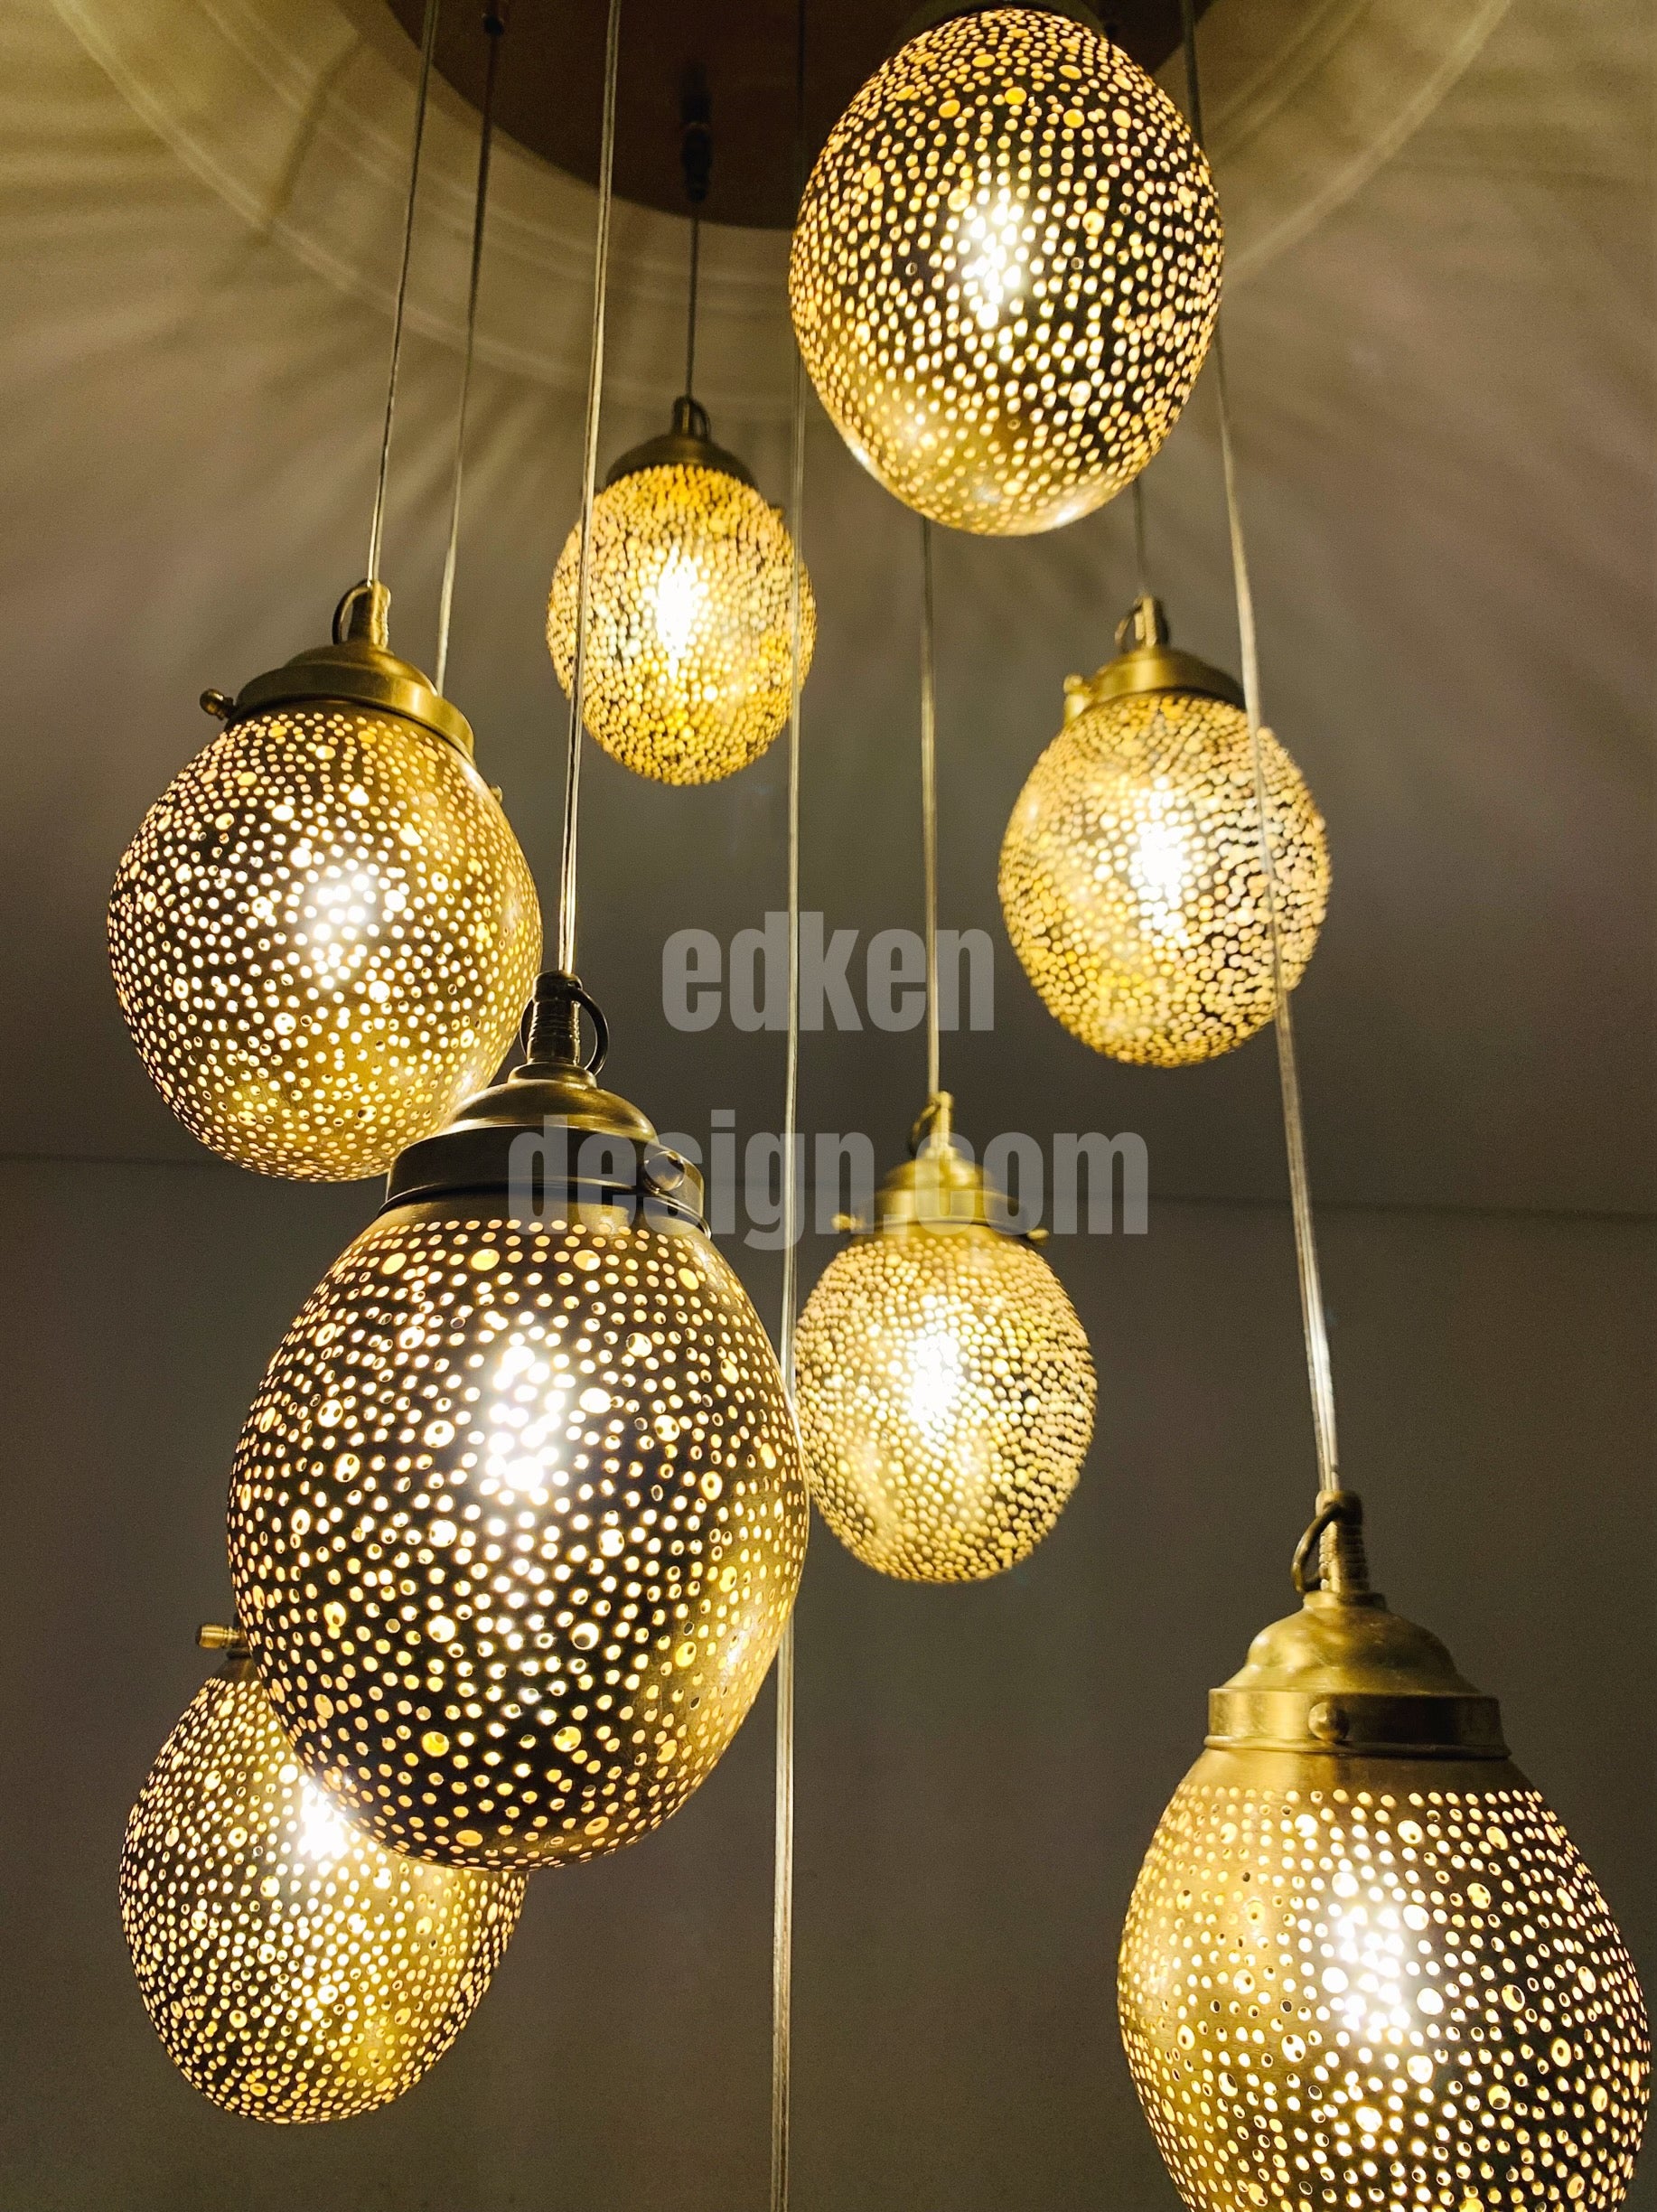 EDKEN LIGHTS - Closer view Morocco Ceiling Eggs Plate Hanging Lamp Shades Fixture Moroccan Handcrafted Brass Chandelier Pendant Lights